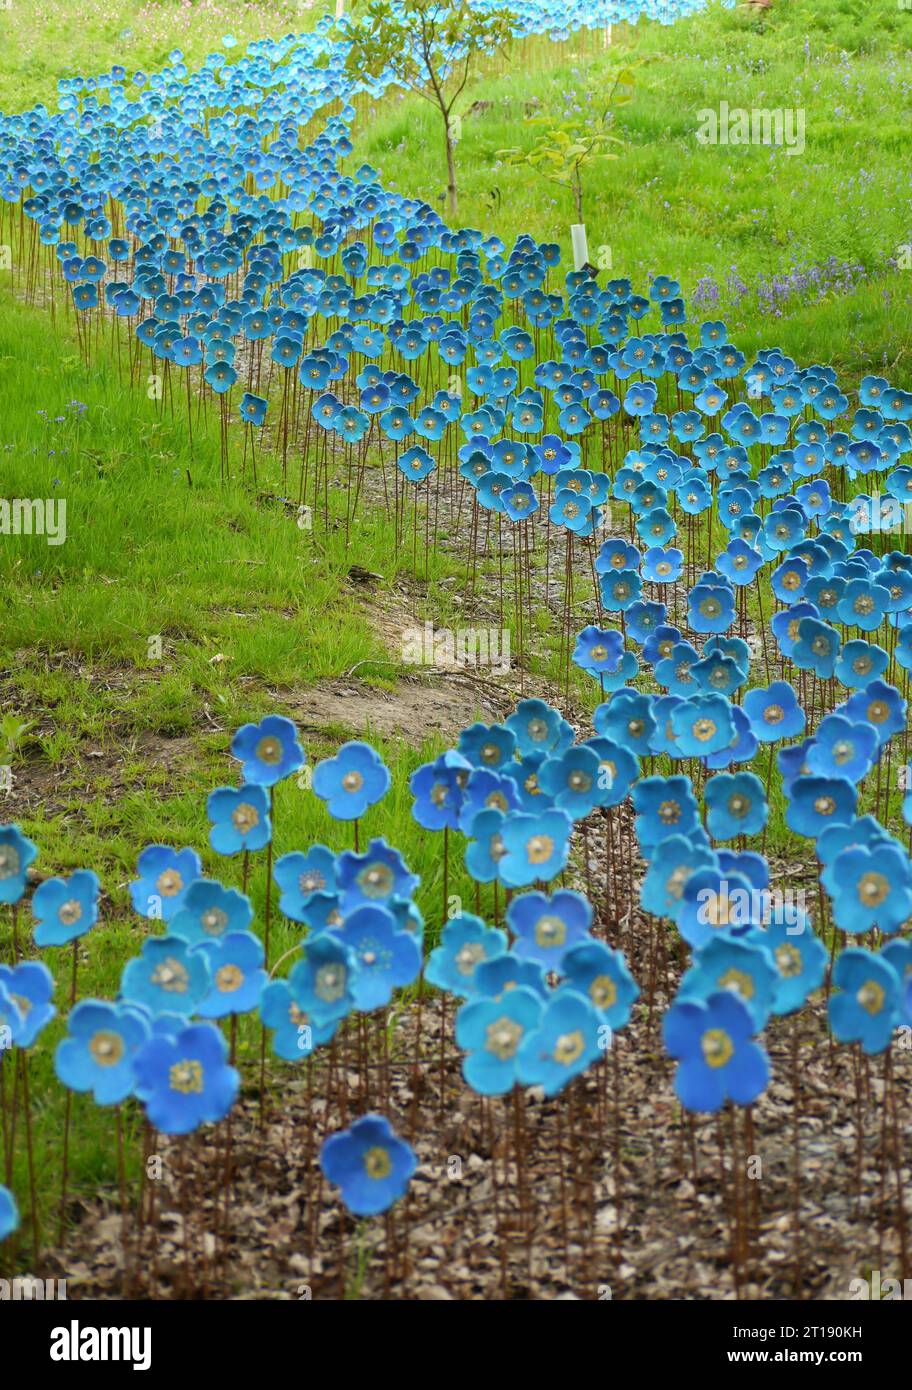 Hand Painted Ceramic Sculptures of Himalayan Blue Poppies by Artist  Anna Whitehouse on Display in the Himalayan Garden & Sculpture Park. England, UK. Stock Photo